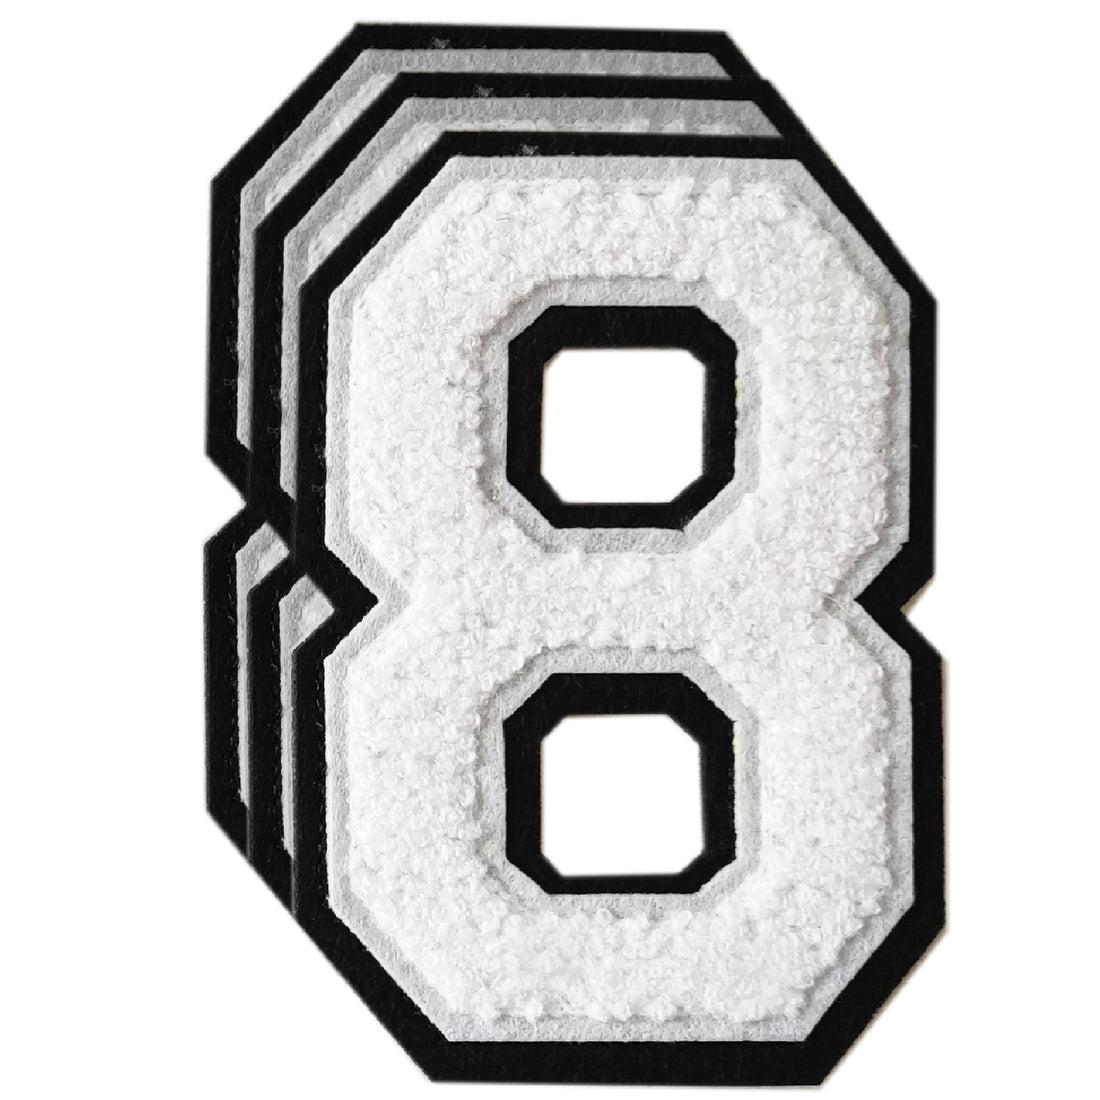 3PCS White/Black Chenille Number, 4.5" Iron on Number Patches, Chenille Stitch Numbers 0 to 9 Patches for Clothing